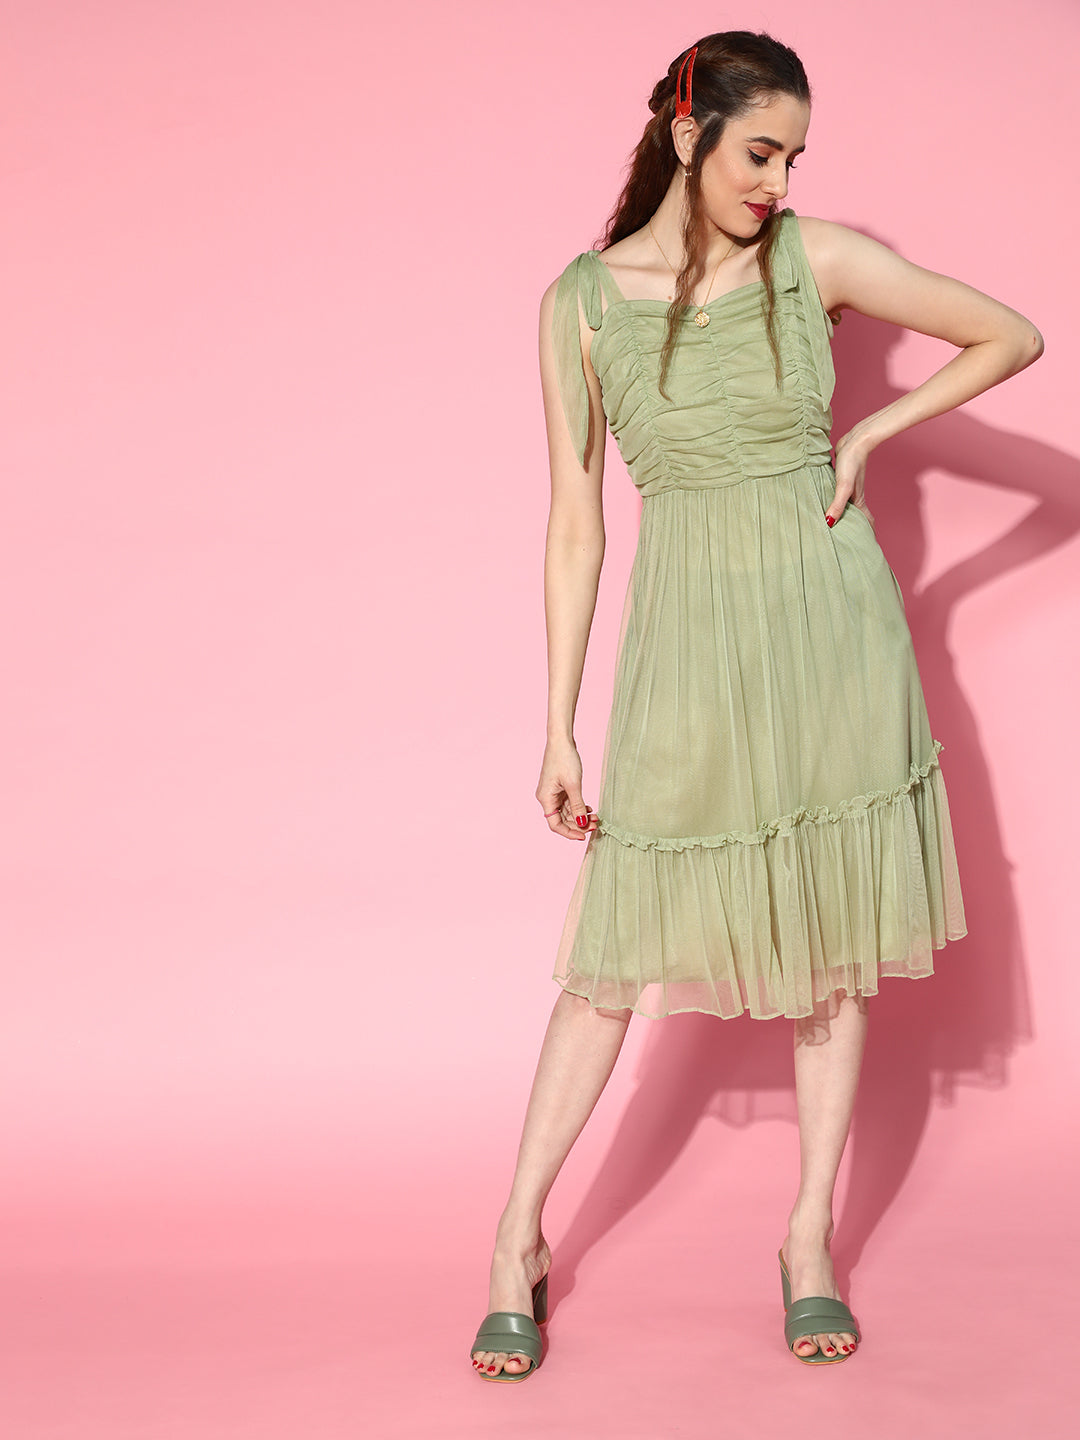 Athena Mint green ruffle tulle dress with straps and ruched yoke - Athena Lifestyle